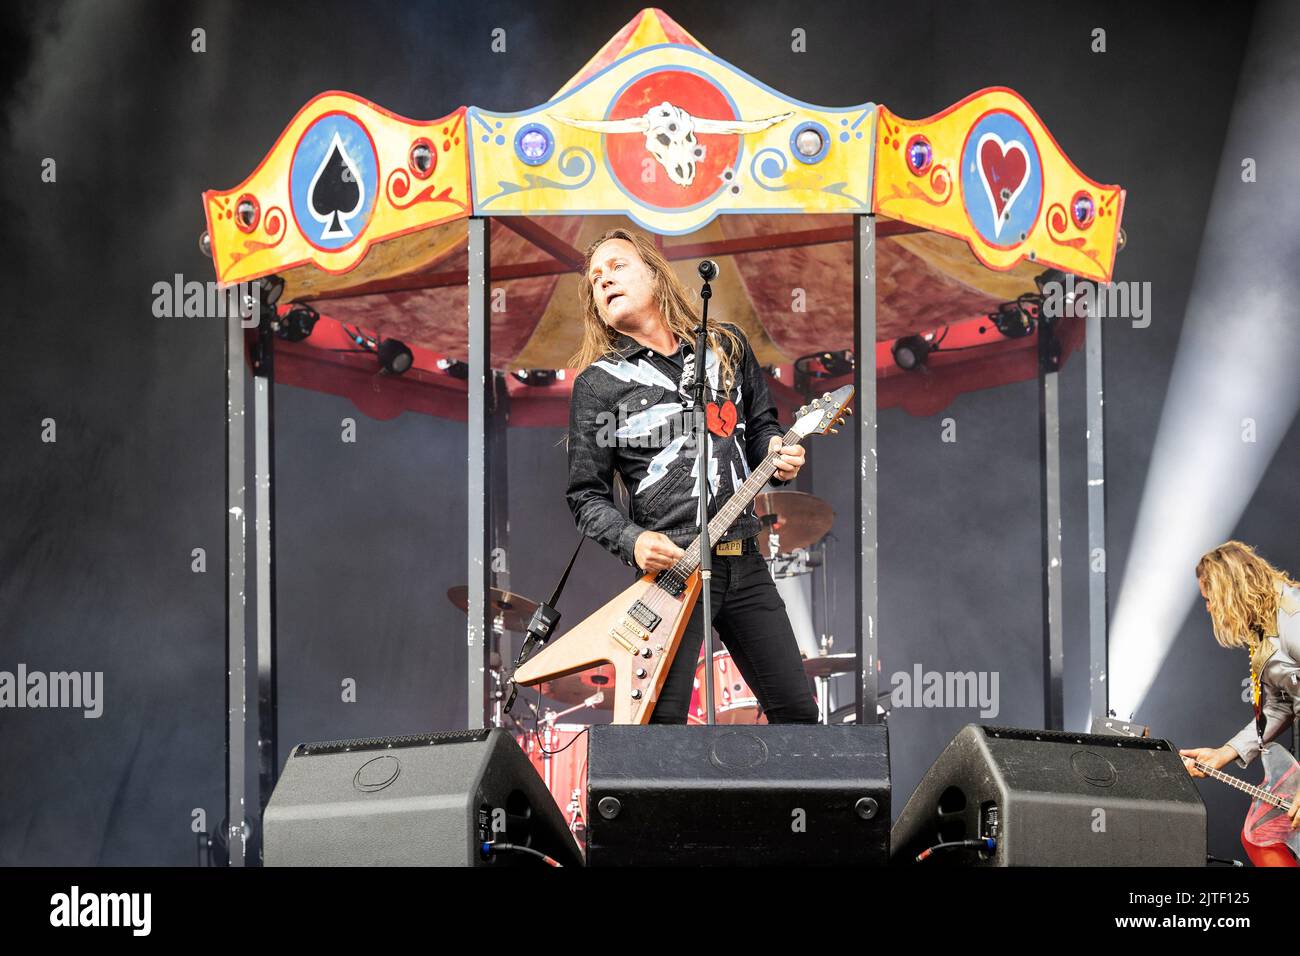 Solvesborg, Sweden. 10th, June 2022. The Danish rock band D-A-D performs a live concert during the Swedish music festival Sweden Rock Festival 2022 in Solvesborg. Here singer and guitarist Jesper Binzer is seen live on stage. (Photo credit: Gonzales Photo - Terje Dokken). Stock Photo